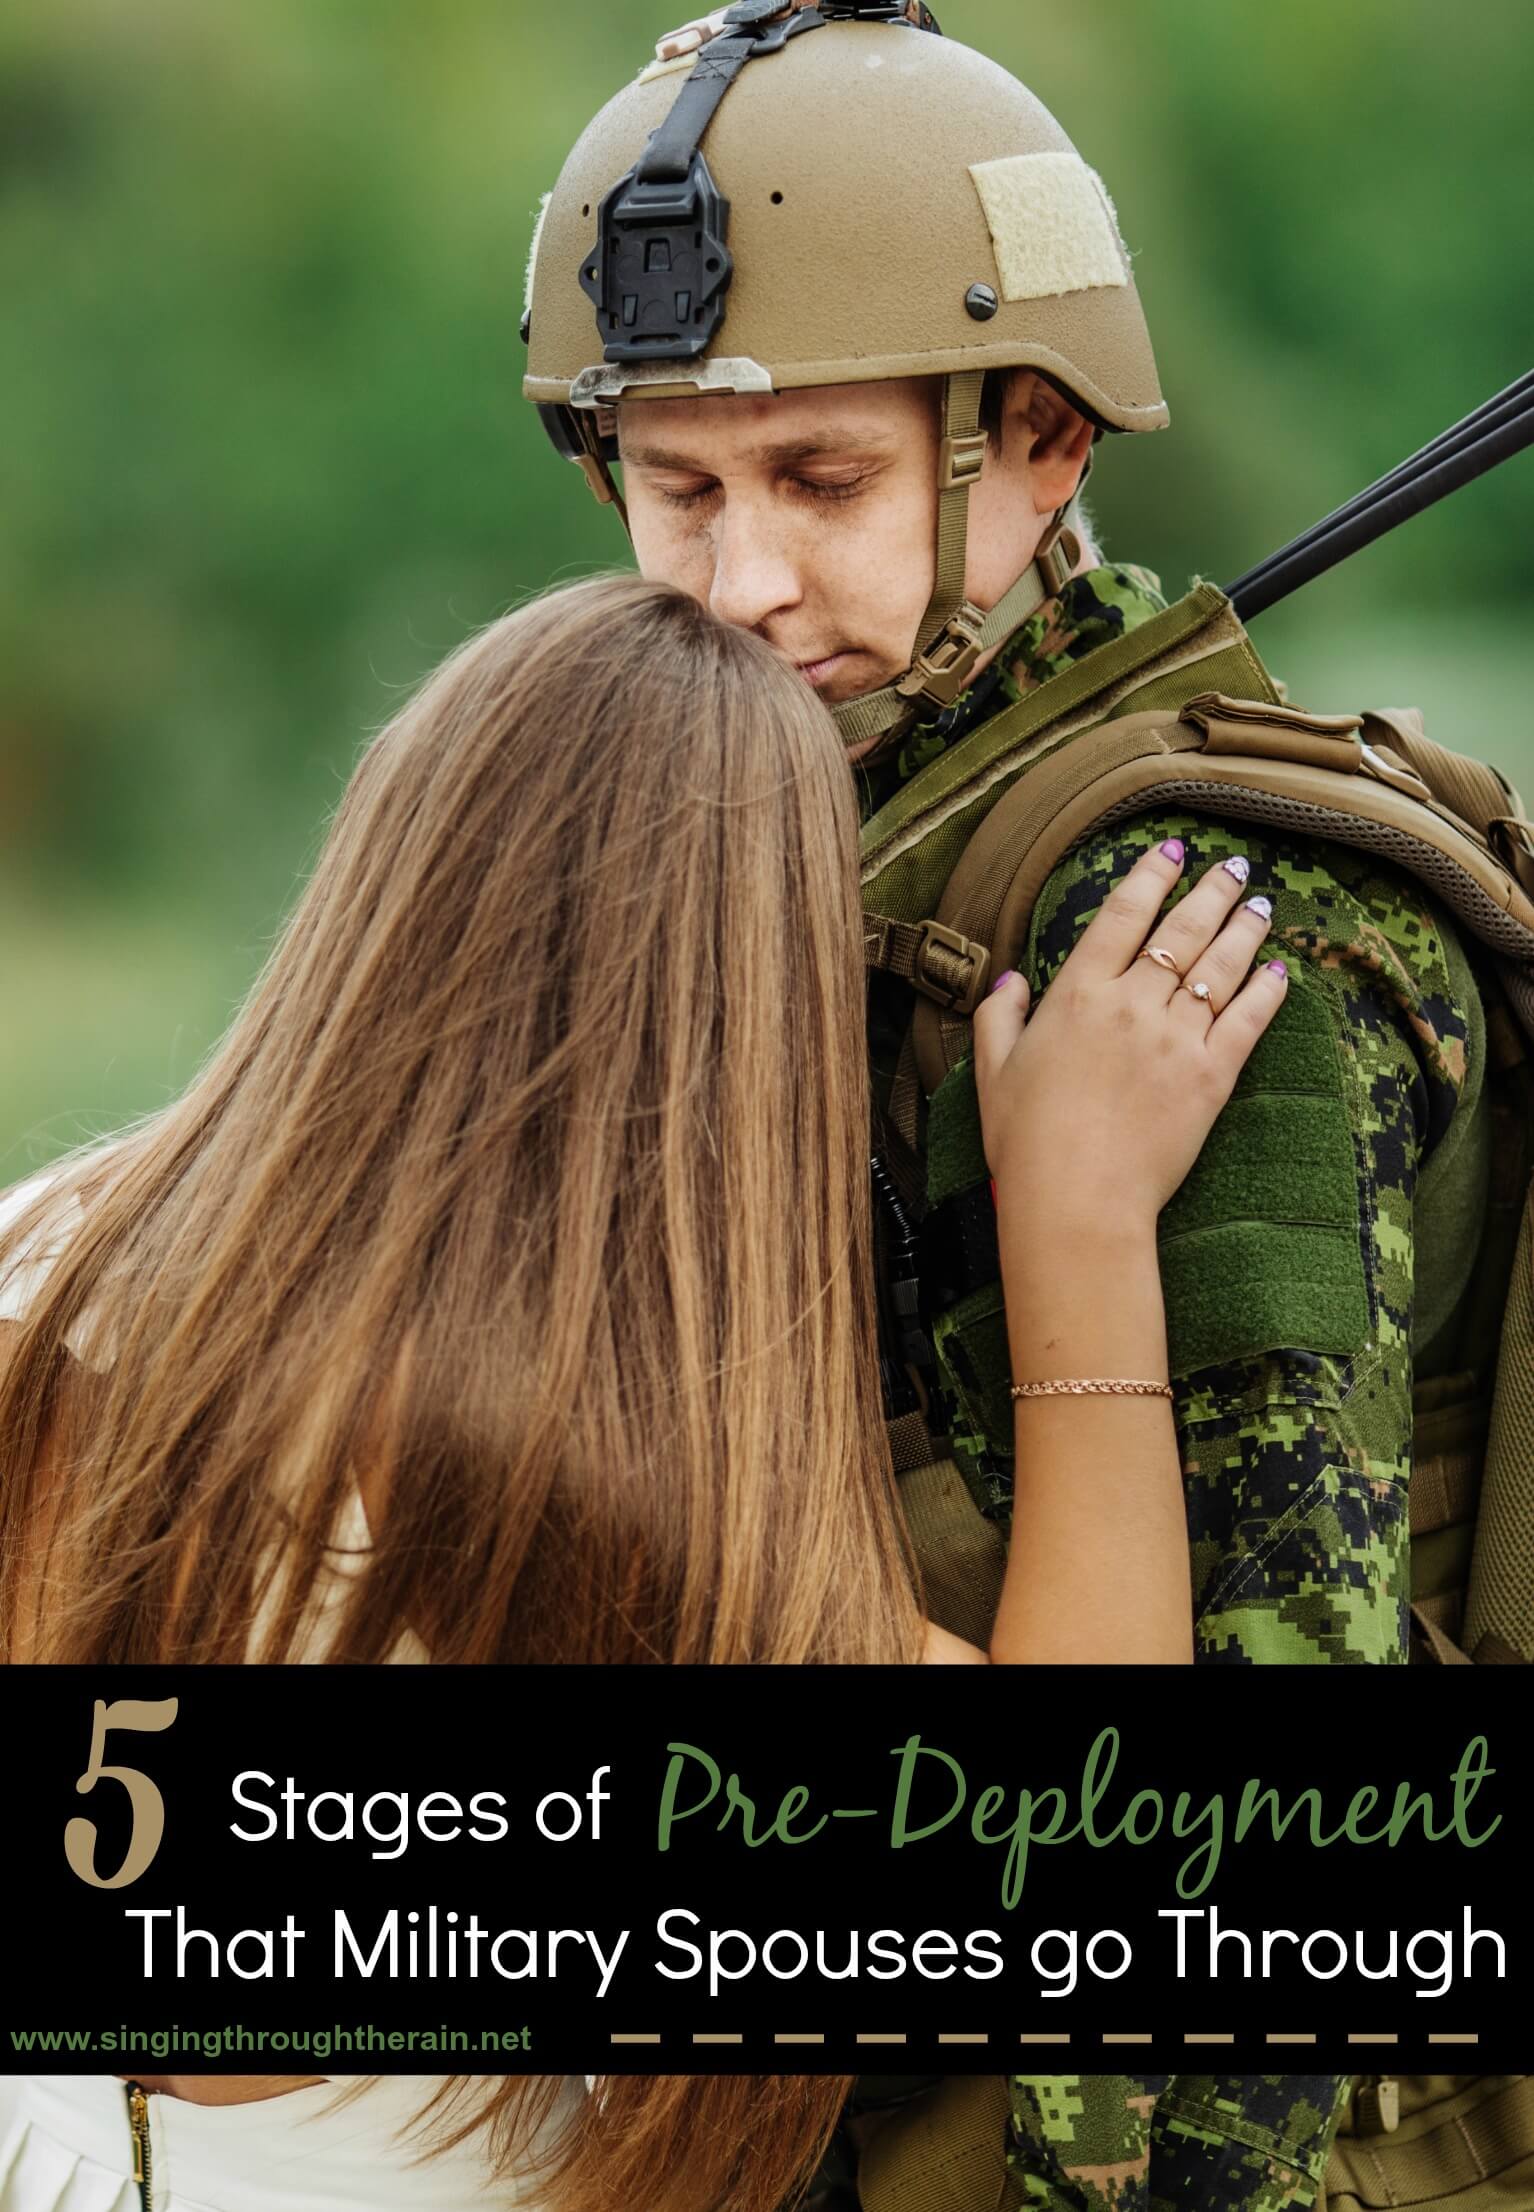 5 Stages of Pre-Deployment Military Spouses go Through